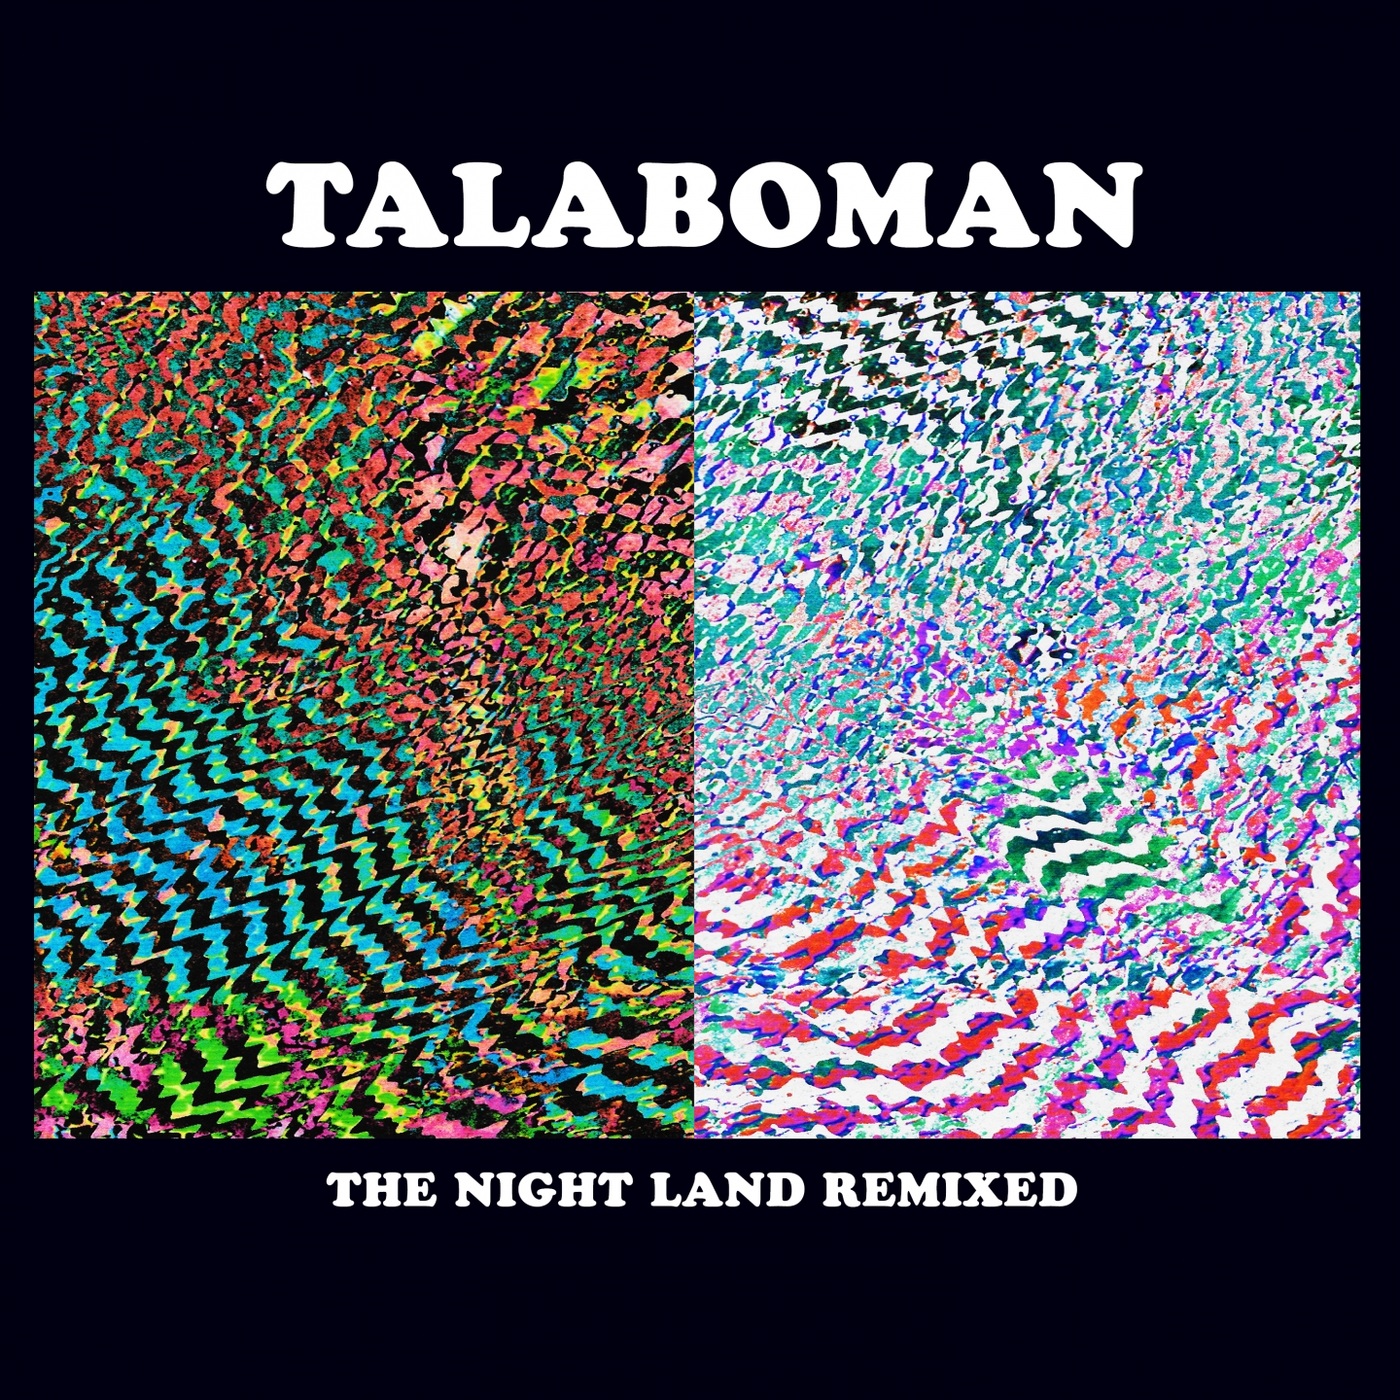 Talaboman - The Night Land Remixed / R&S Records